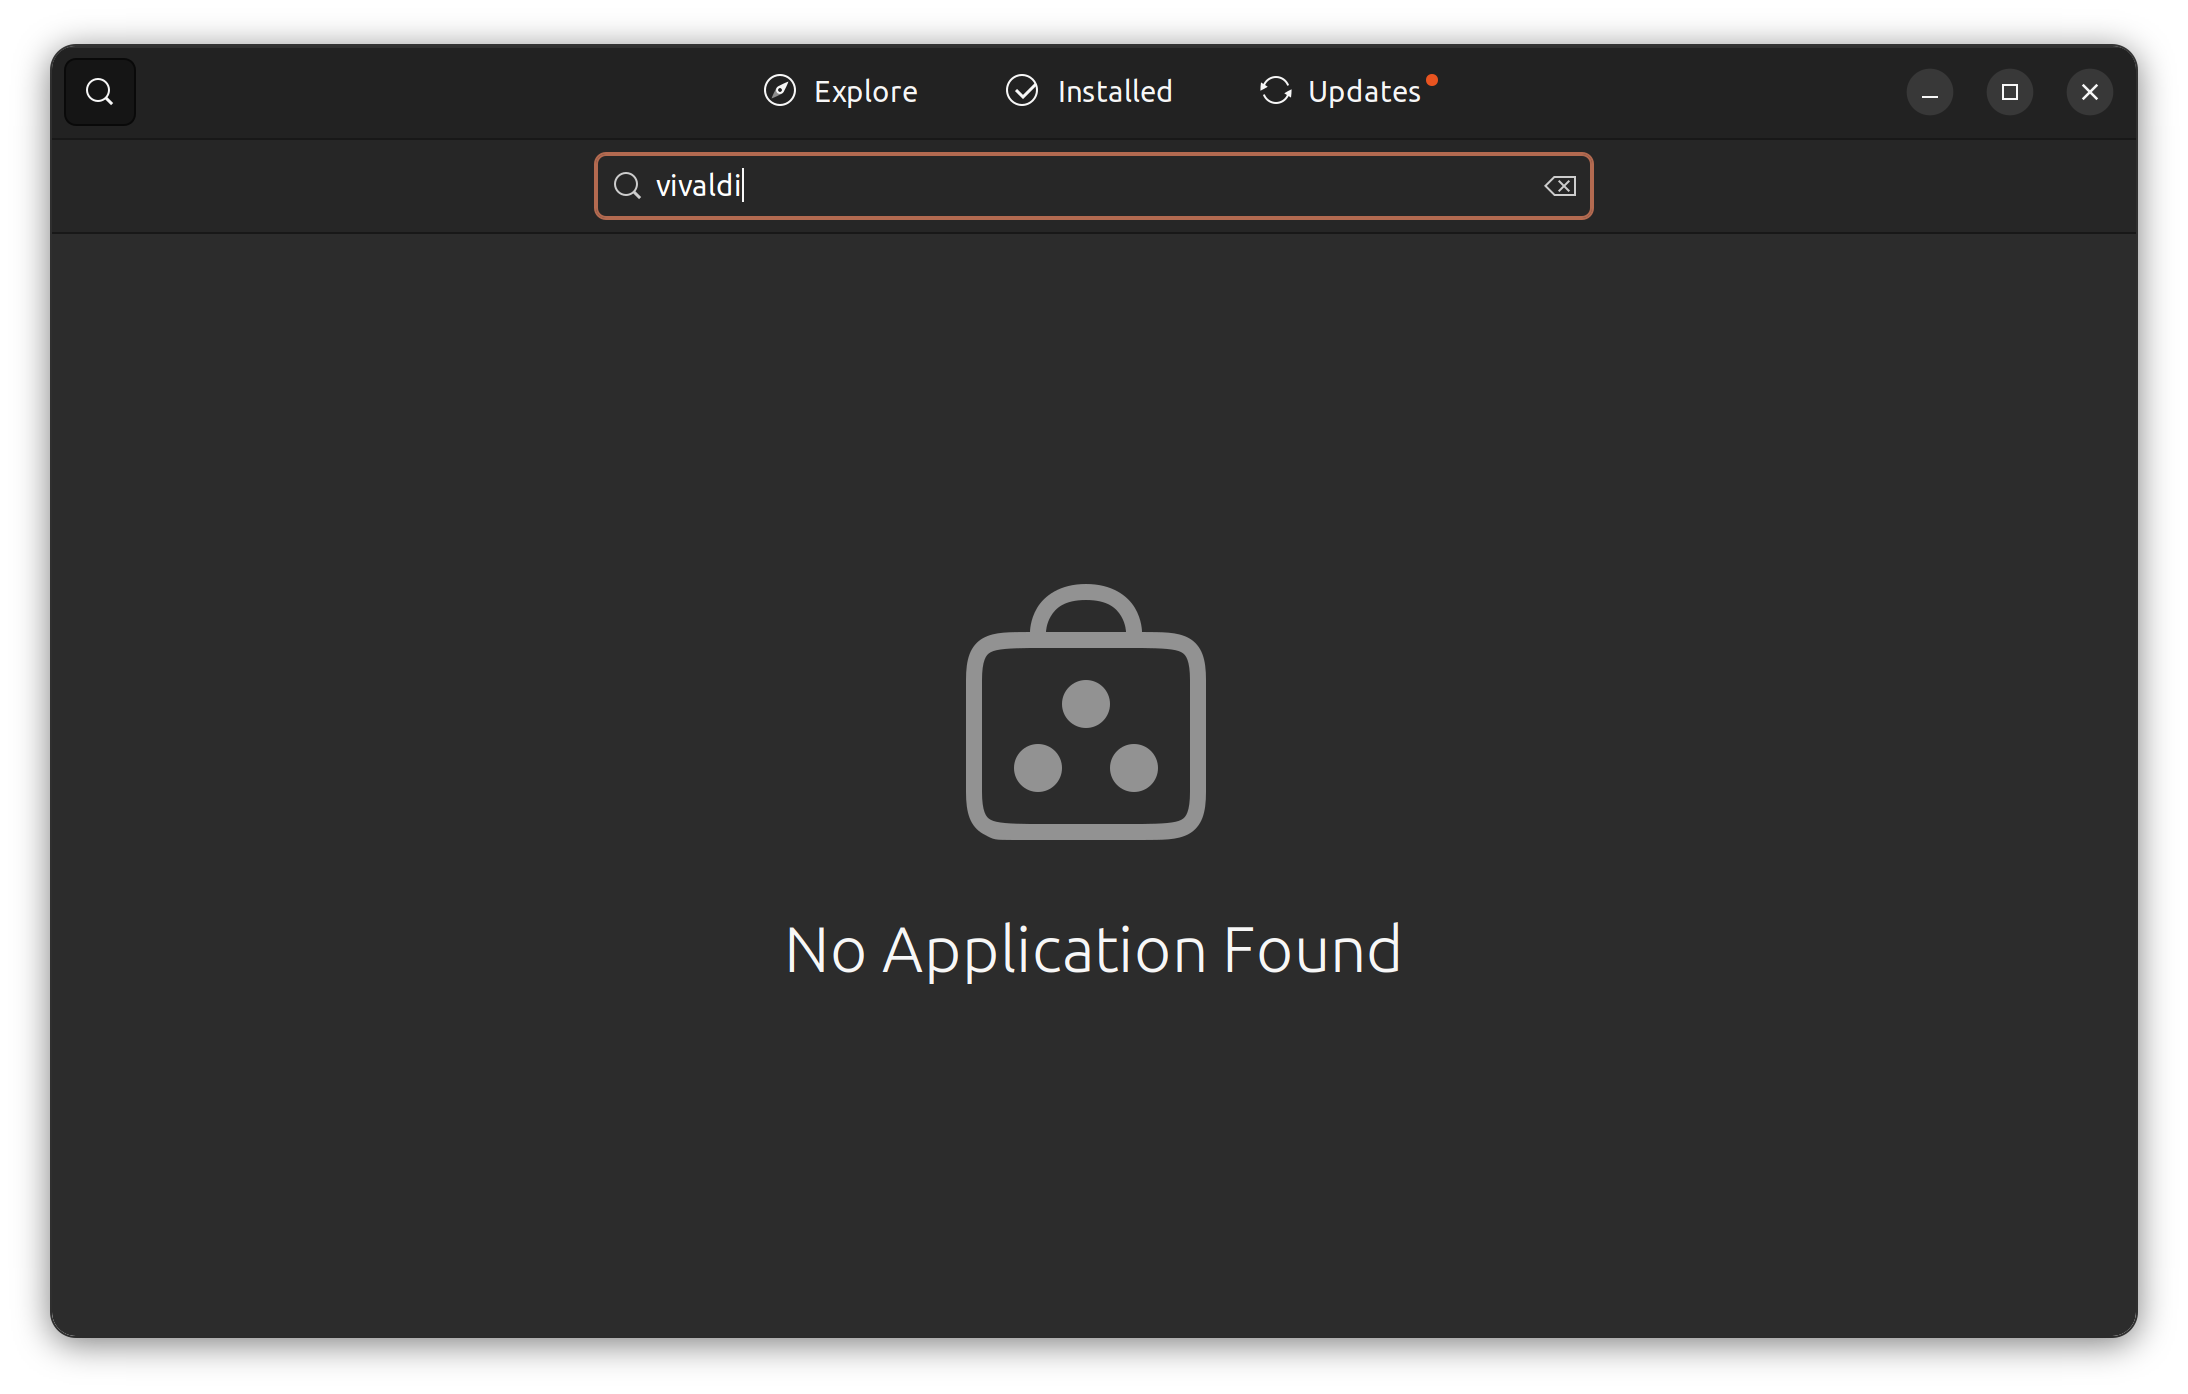 Searching for installed applications may not show any results in Ubuntu Software Center